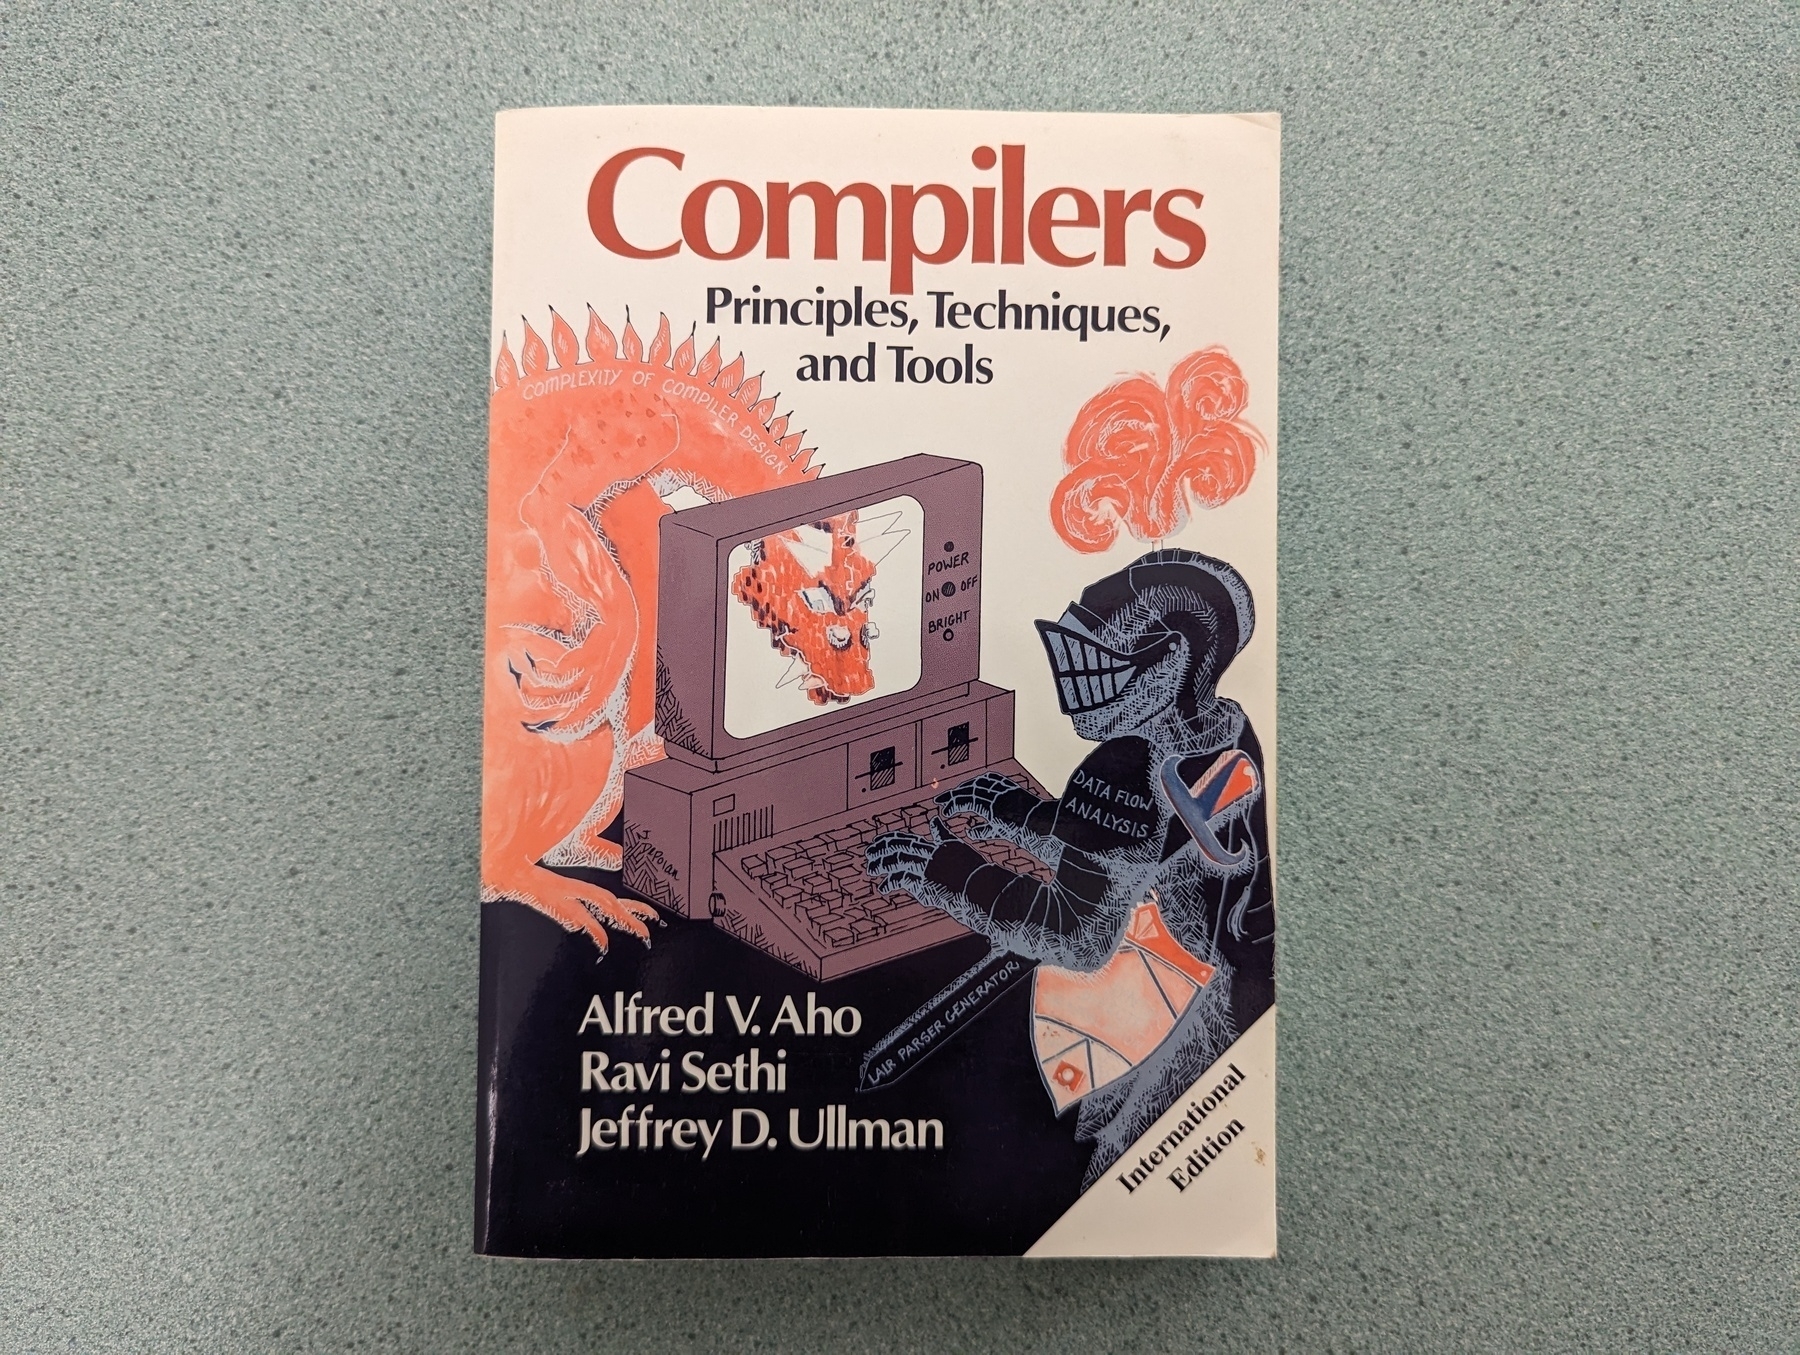 Auto-generated description: A book titled Compilers: Principles, Techniques, and Tools by Alfred V. Aho, Ravi Sethi, and Jeffrey D. Ullman, often referred to as the Dragon Book, is lying on a textured surface.